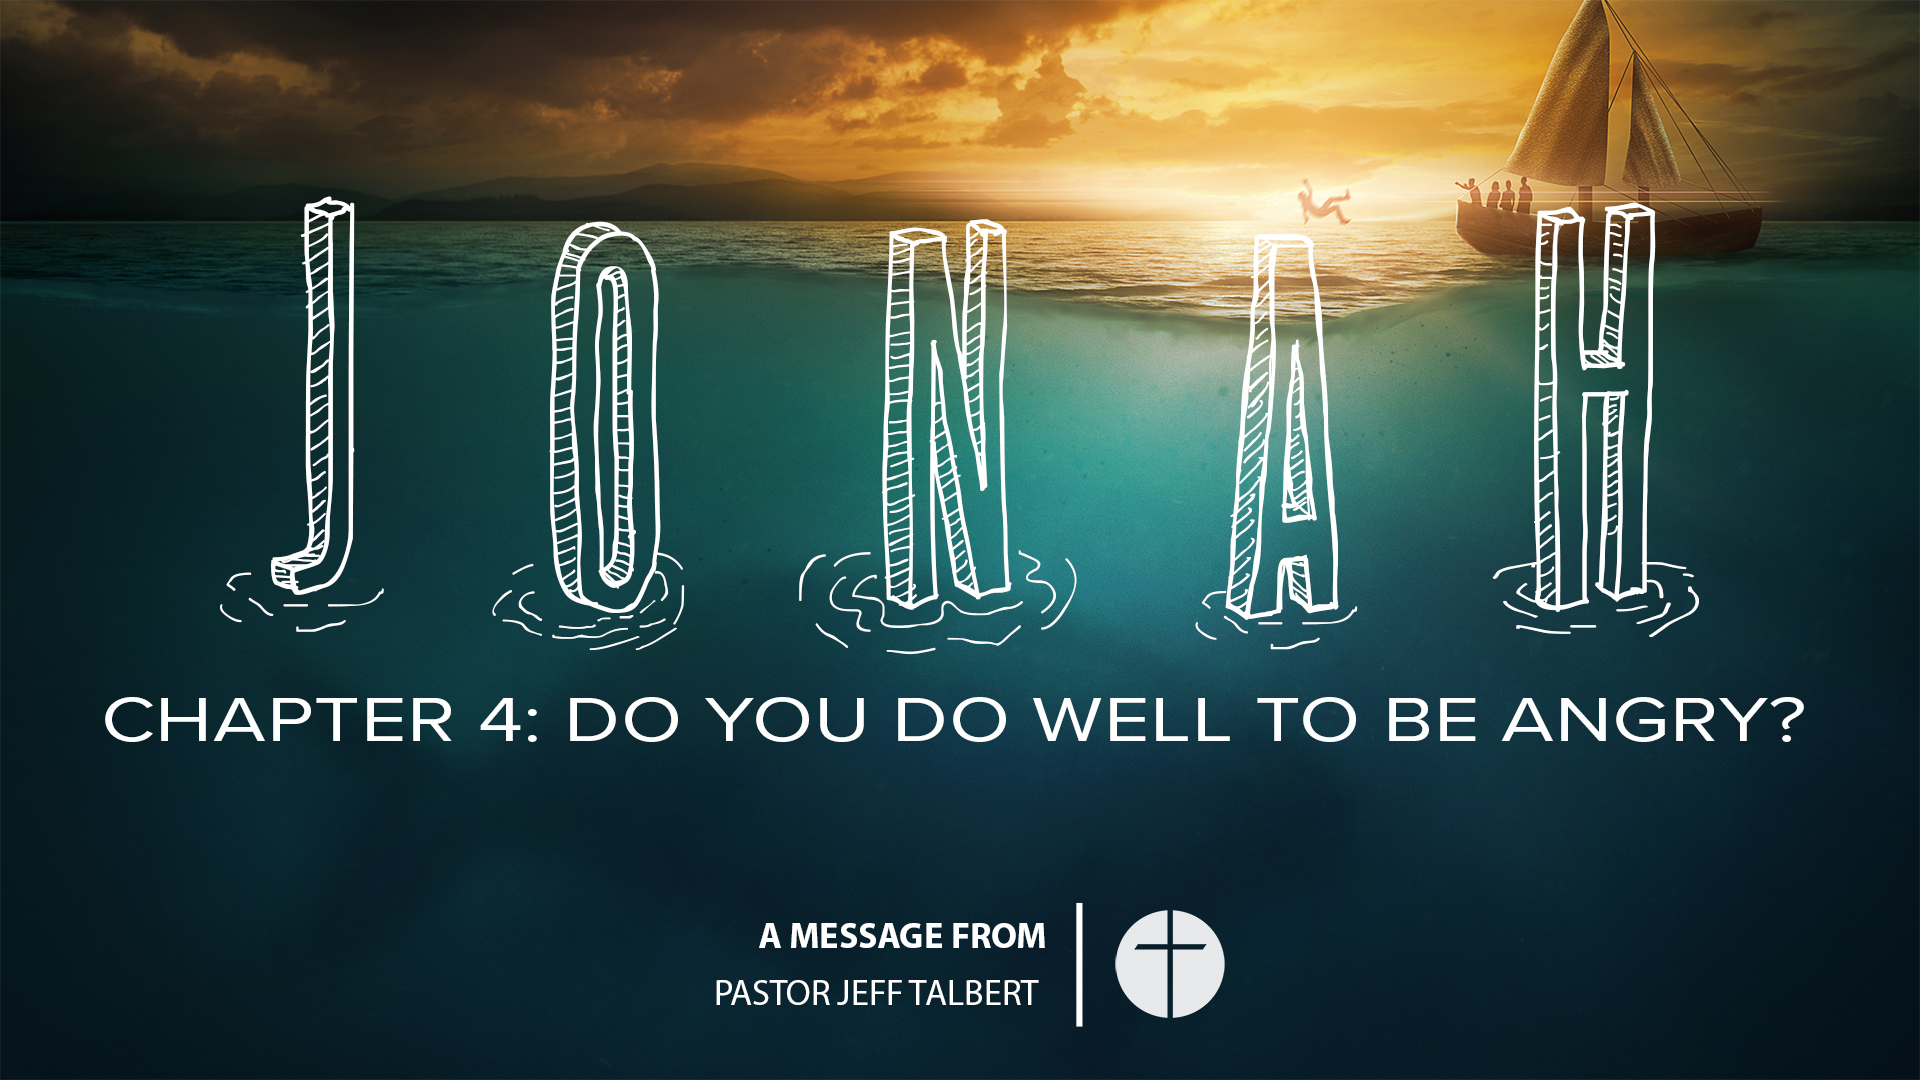 Jonah Chapter 4: Do You Do Well to Be Angry? Image